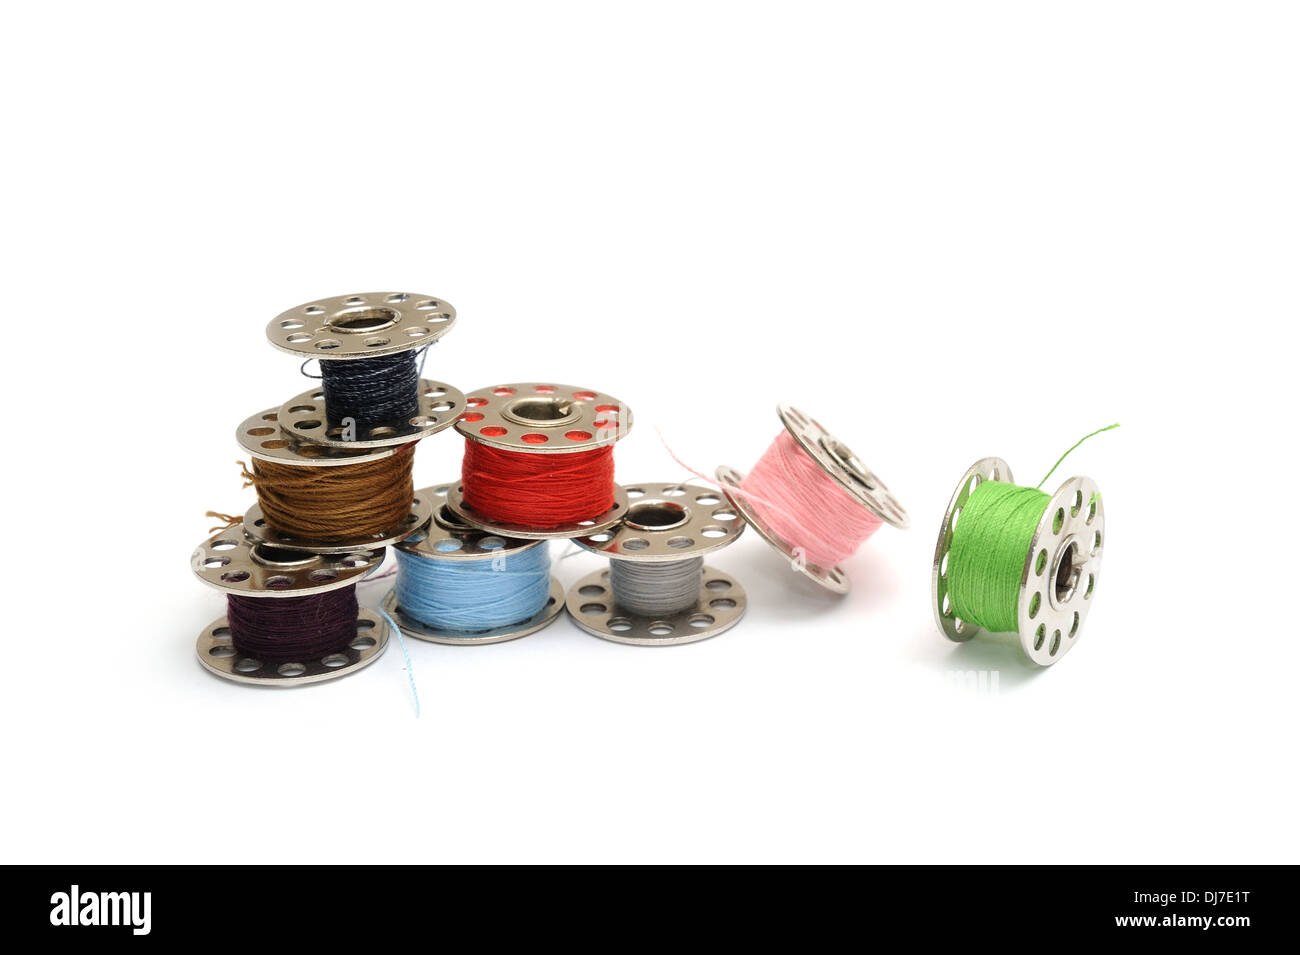 Different colored Sewing machine bobbins Stock Photo